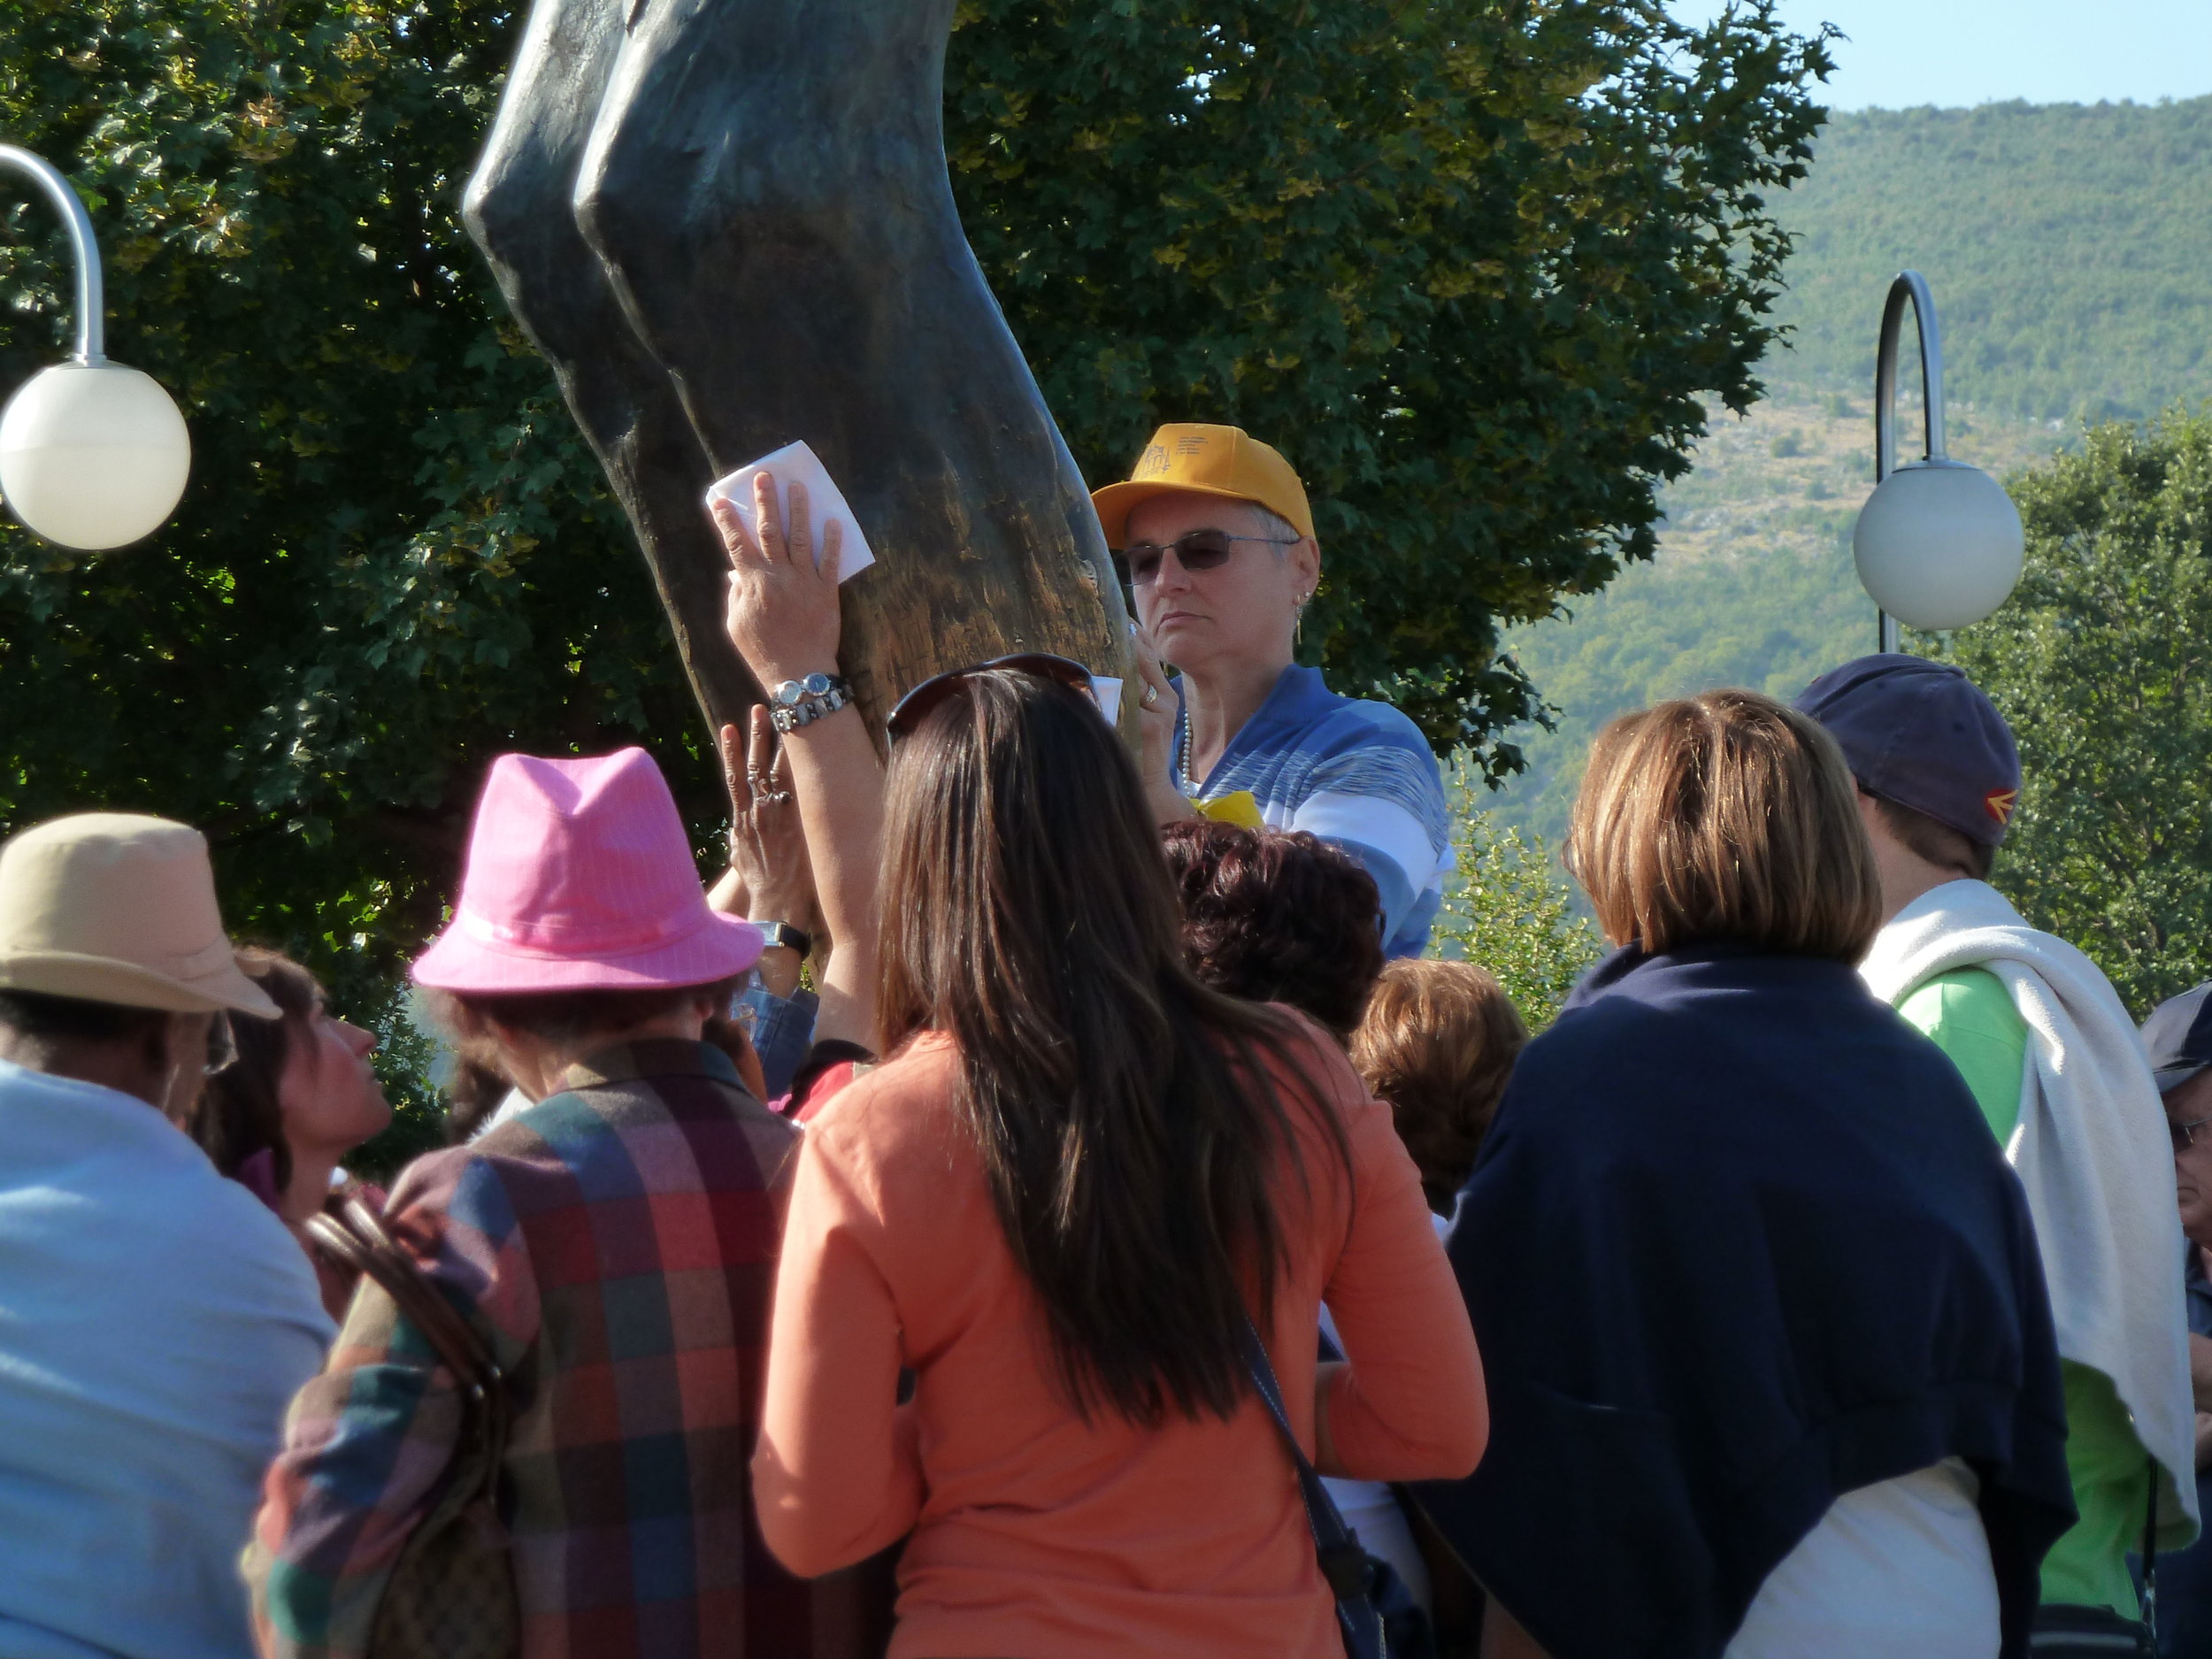 Tourists examining the "weeping knee" of the Risen Christ statue, Medugorje, Hercegovina